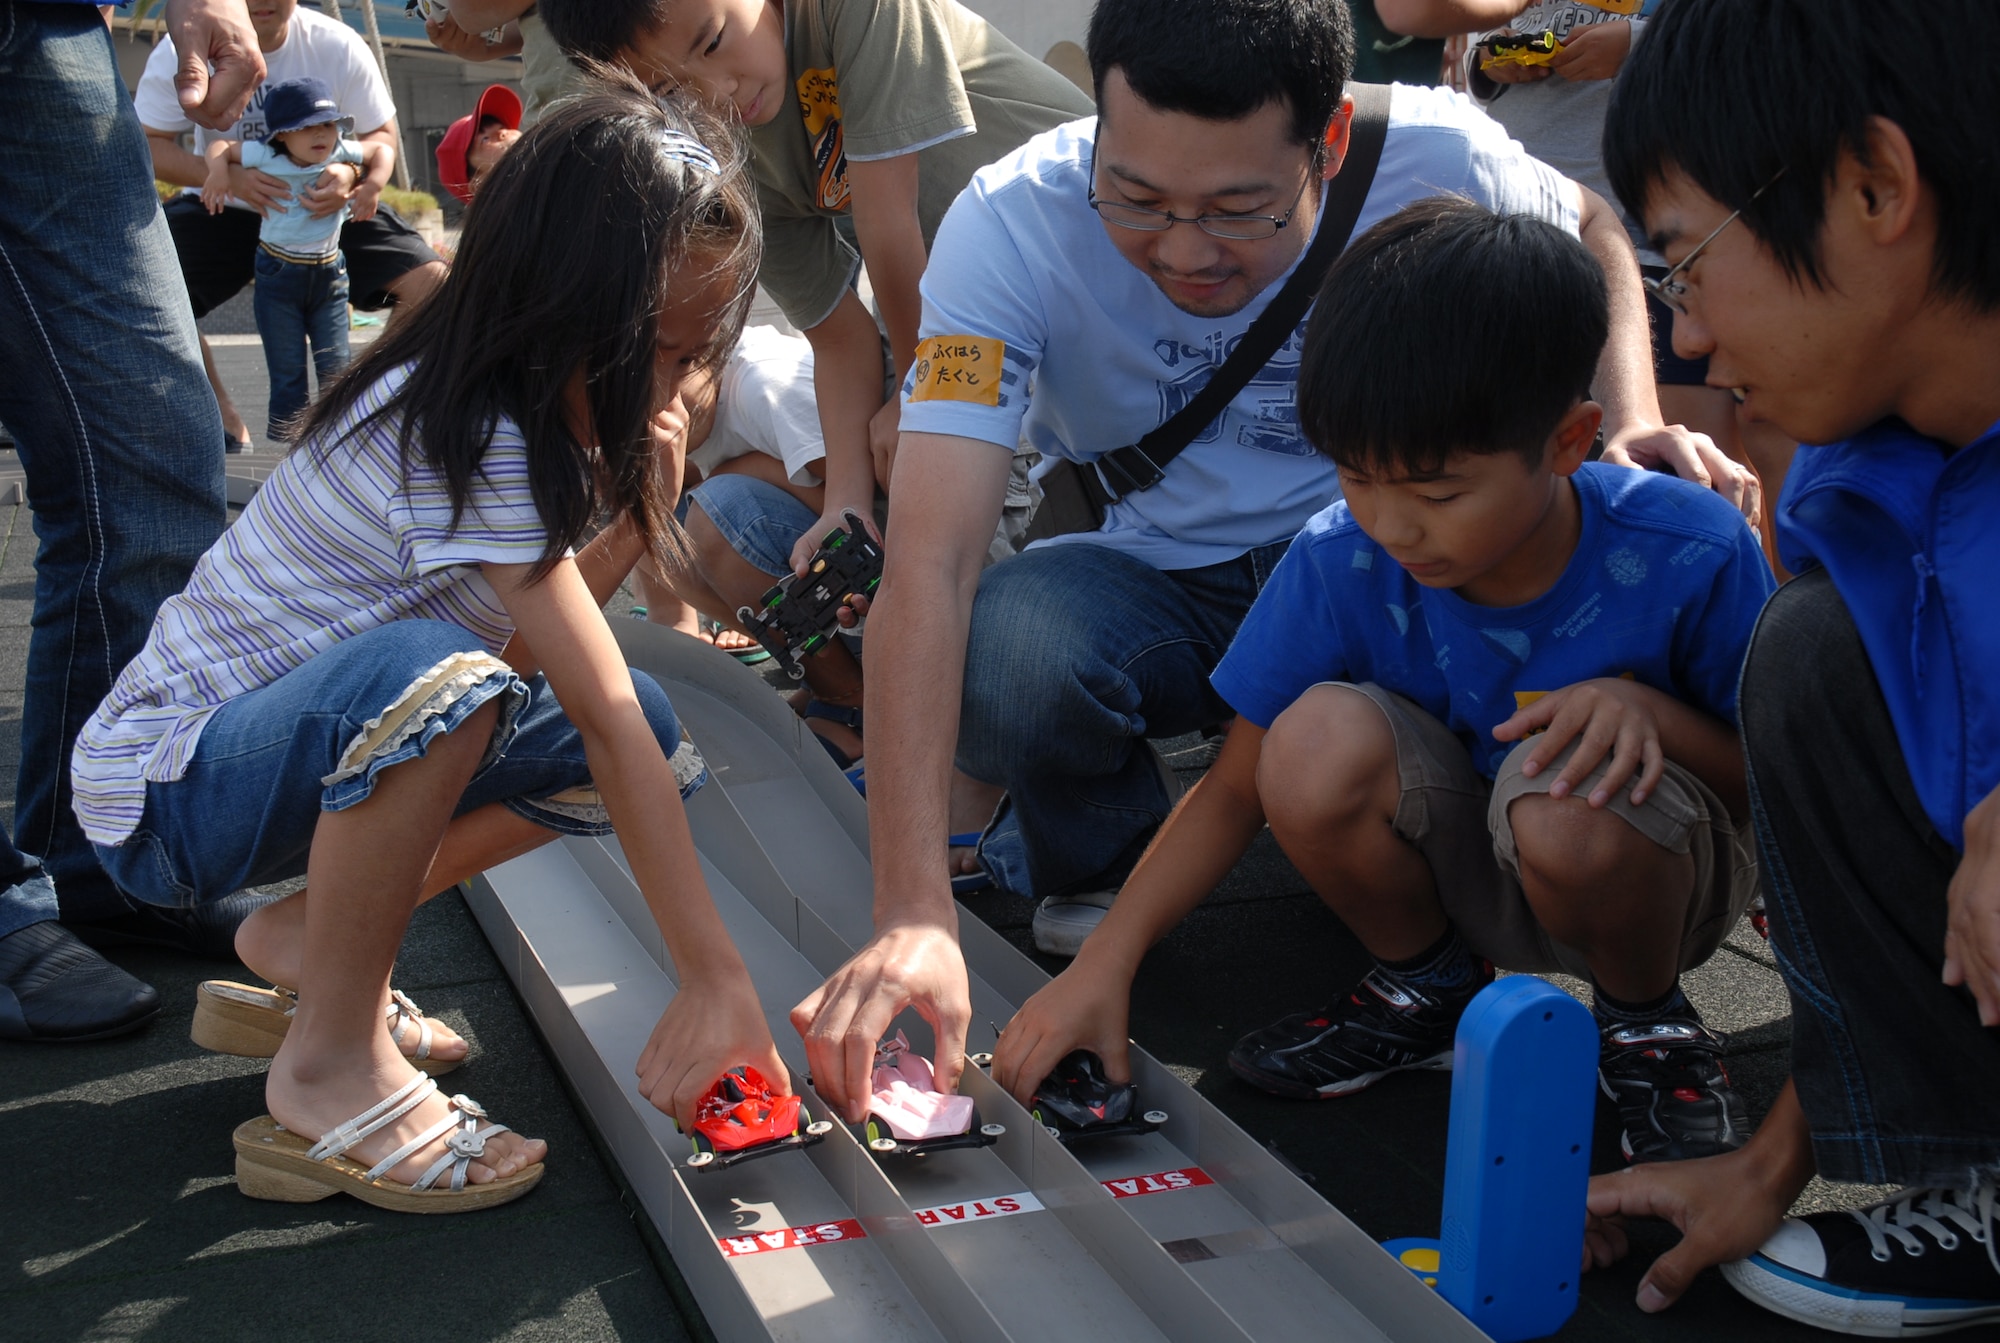 Participants position their cars at the starting line after building them in a workshop at the Okinawa City Children’s Zoo April 27. More than 50 American and Okinawan children took part in the building and racing of the battery-operated cars. (U.S. Air Force photo/Airman Chad Warren)